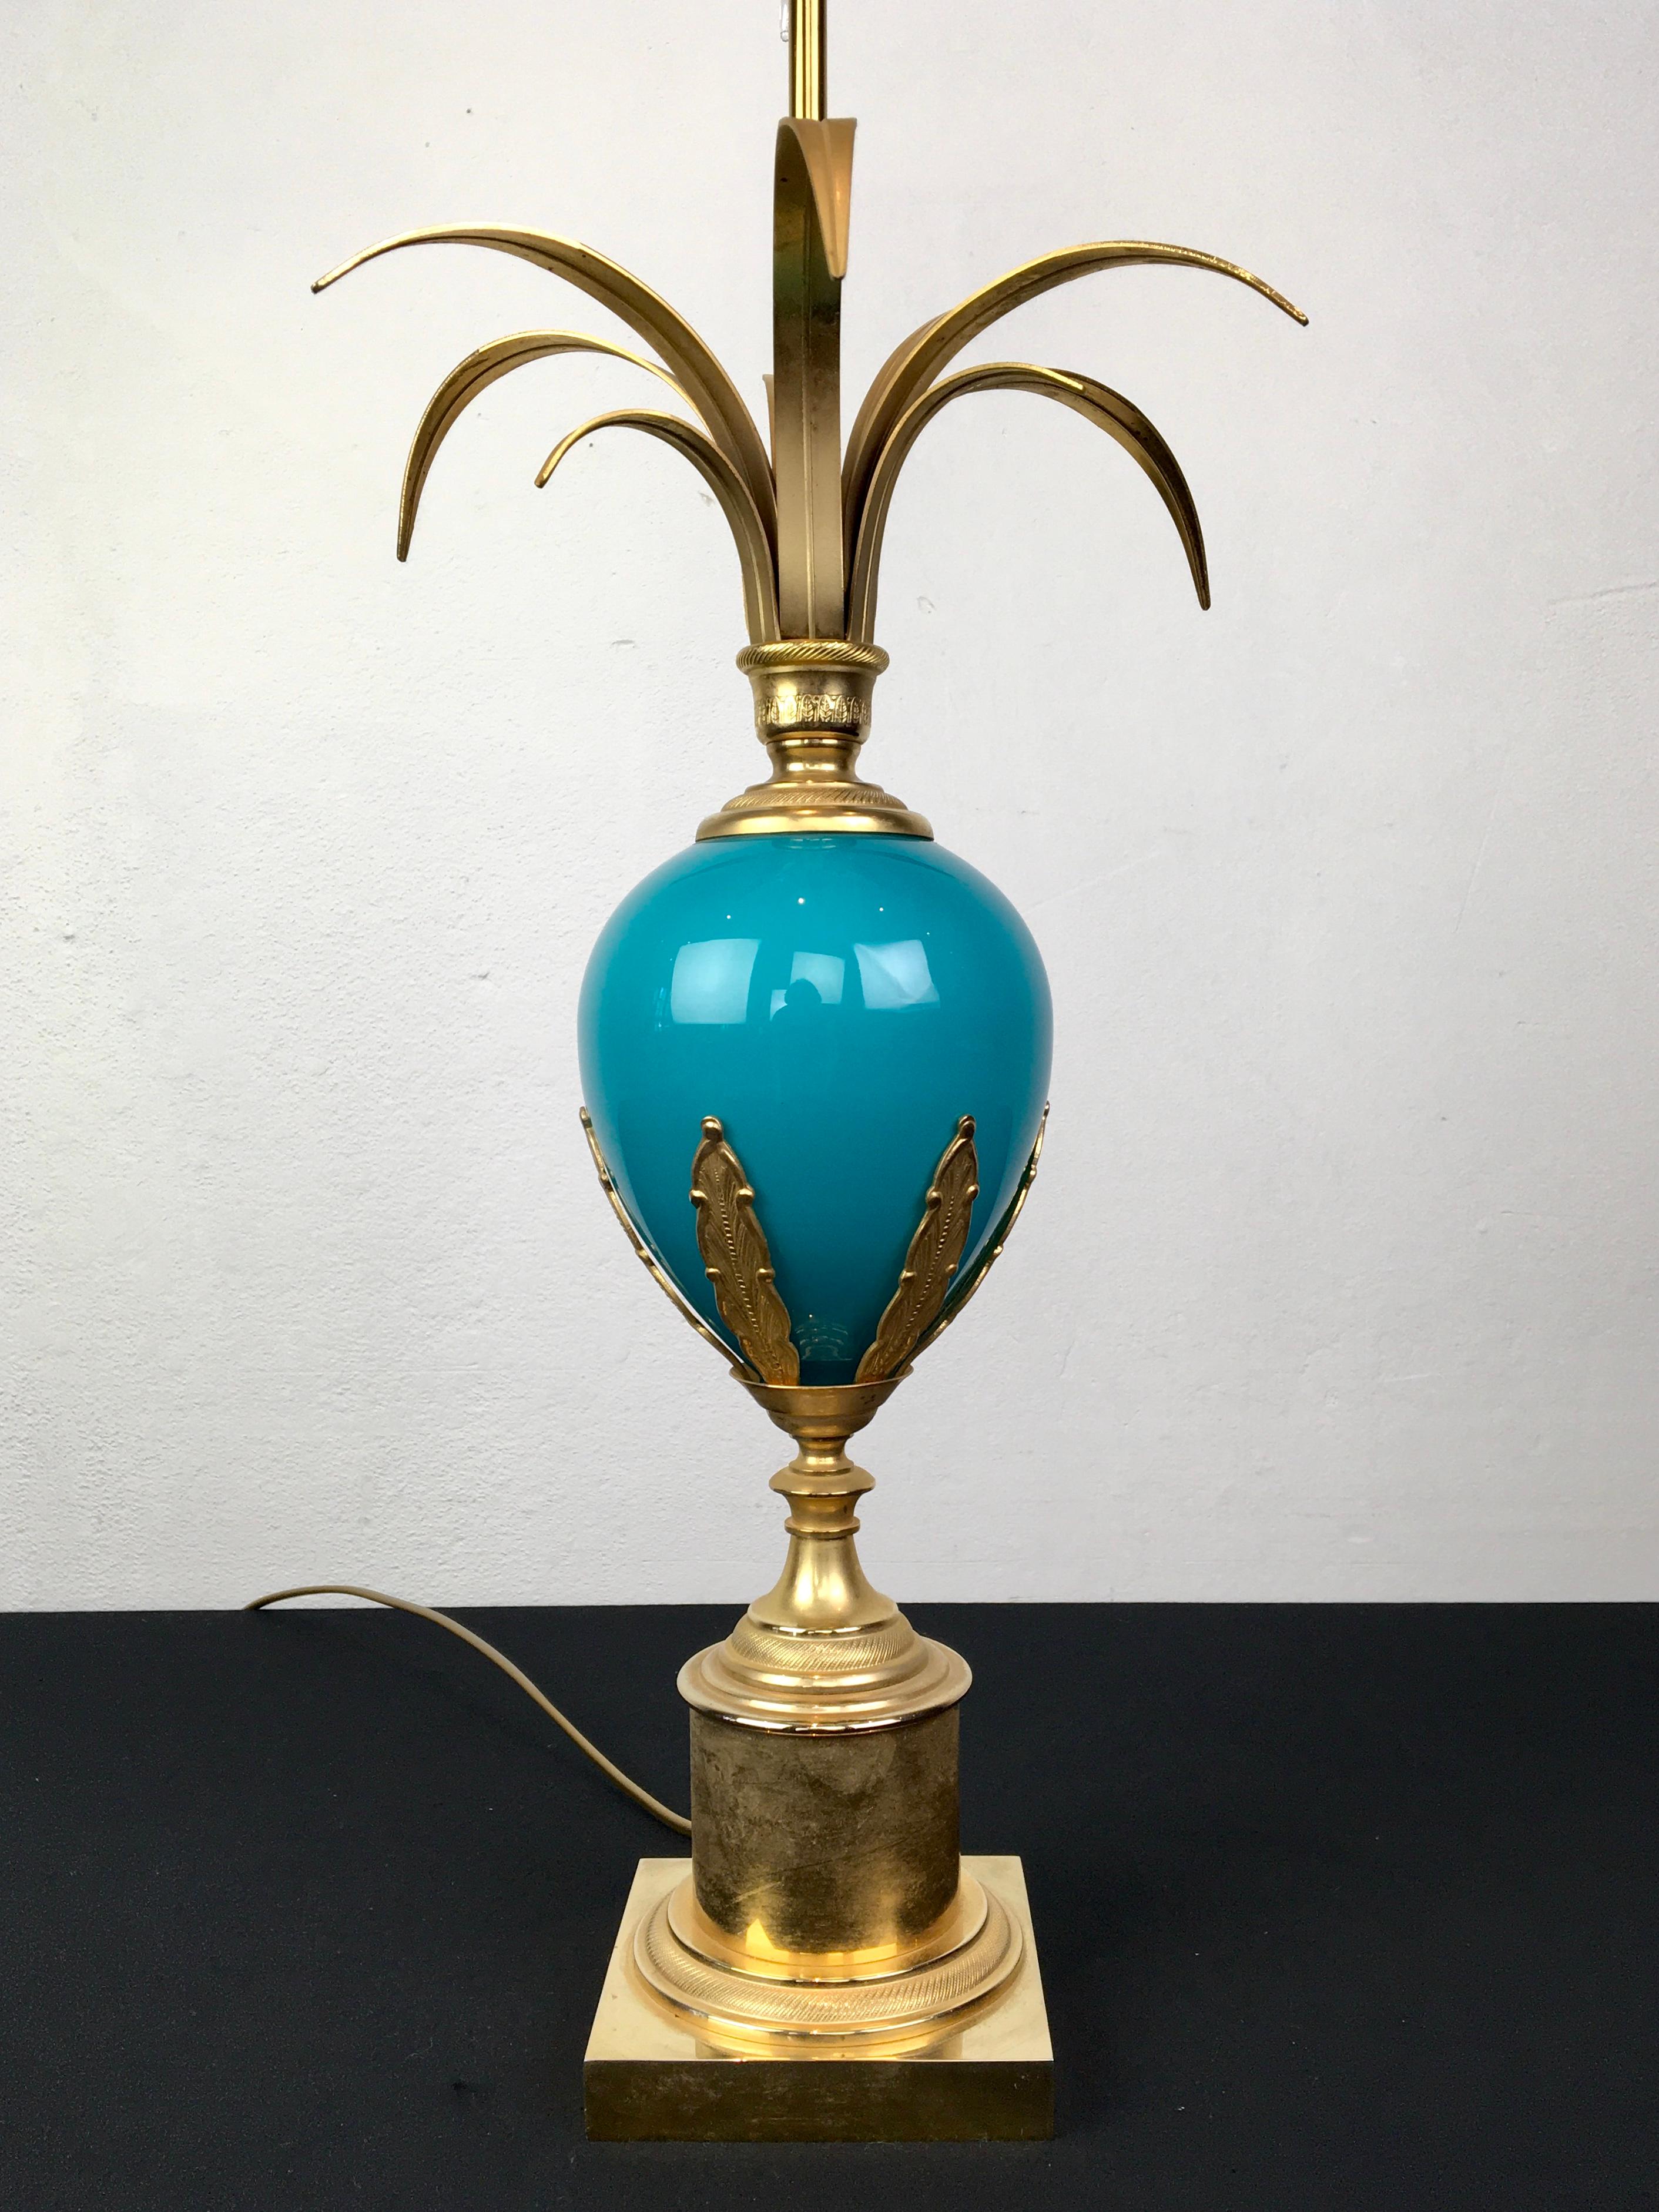 Blue turquoise ostrich egg table lamp by S.A. Boulanger. 
A stylish table lamp with a blue opaline ostrich egg and palm leaves on top. 
The base is made of brass with moulded brass leaves on the opal egg and it has a pine cone finish on top.